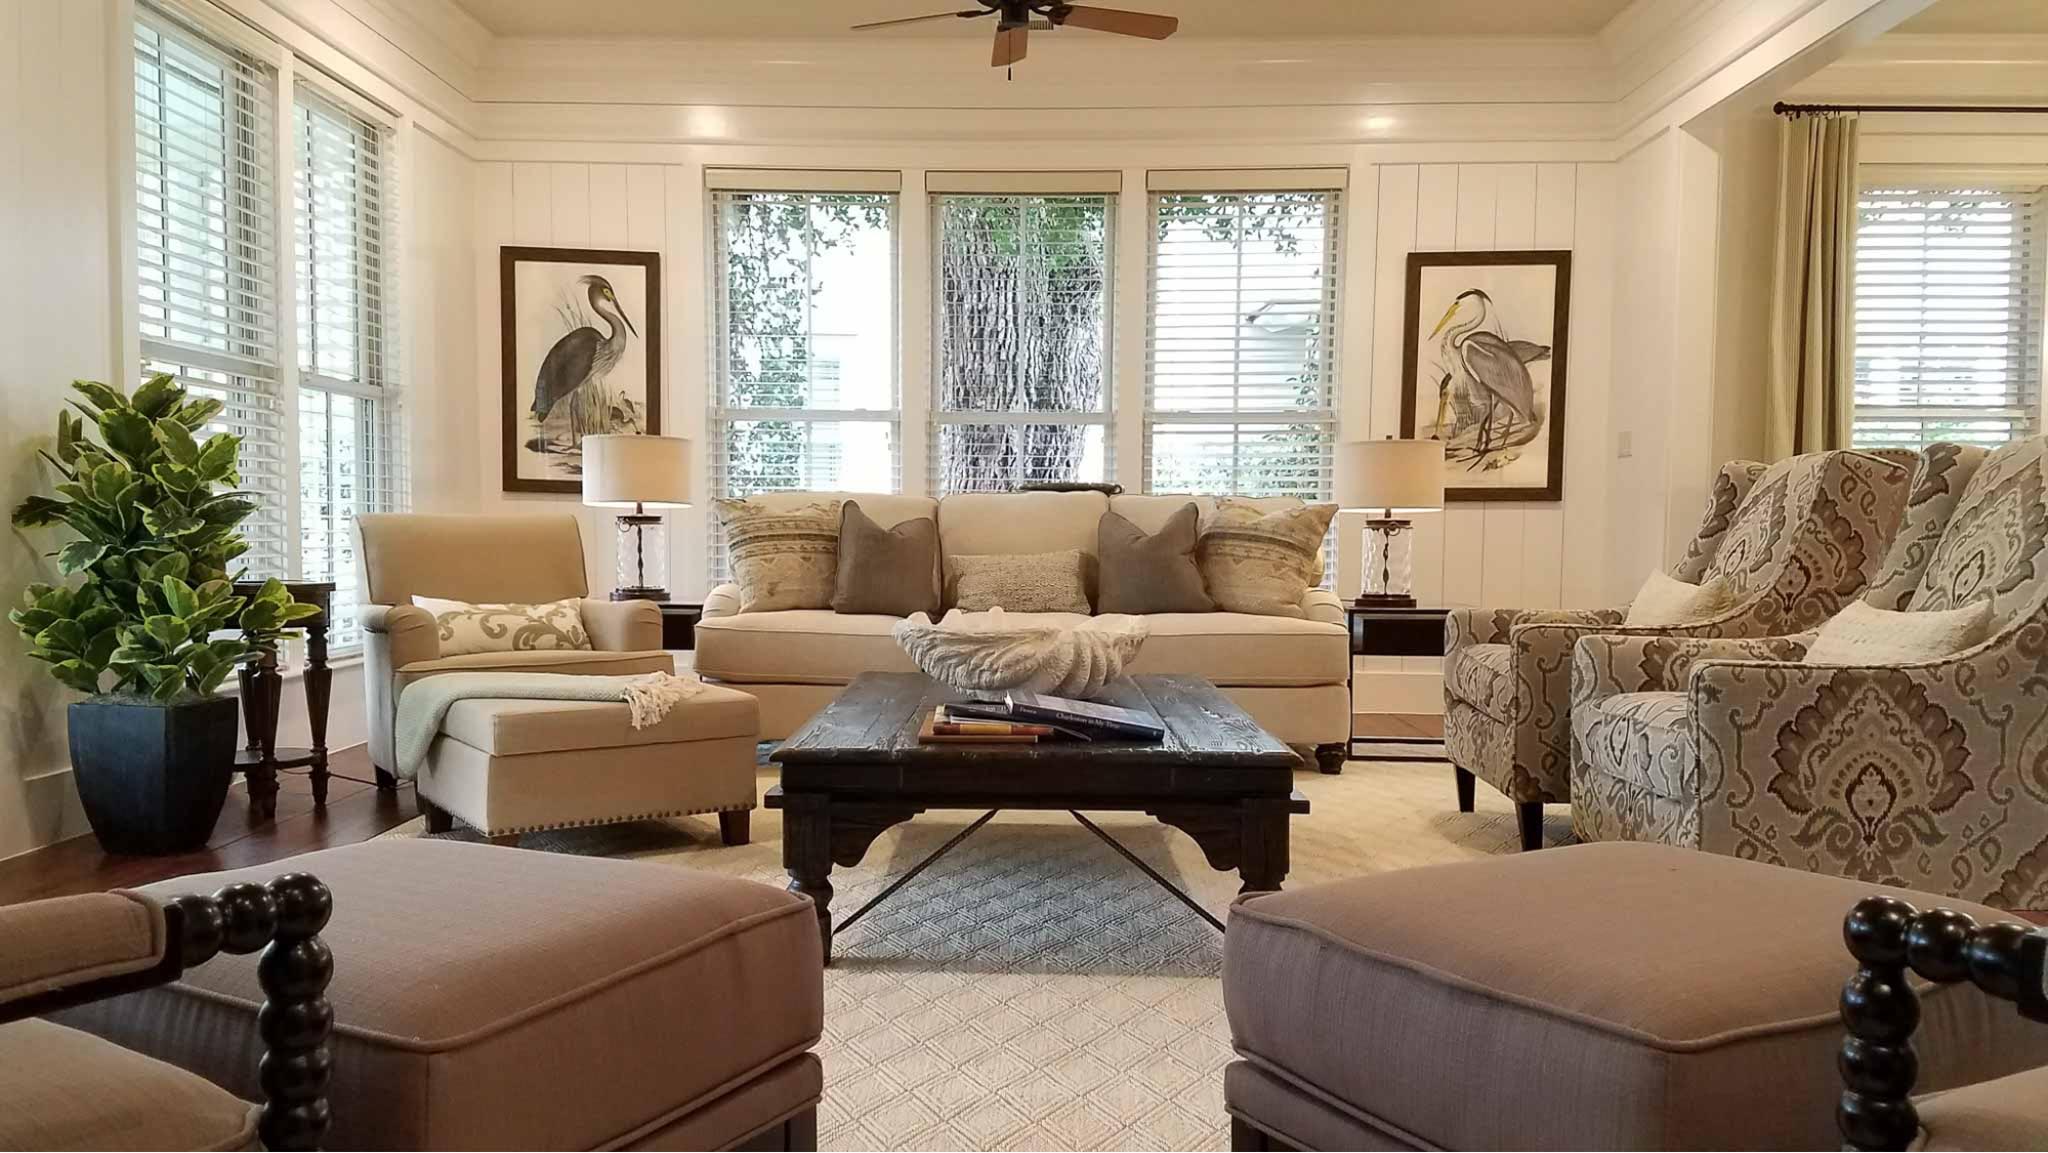 Sitting area of living room